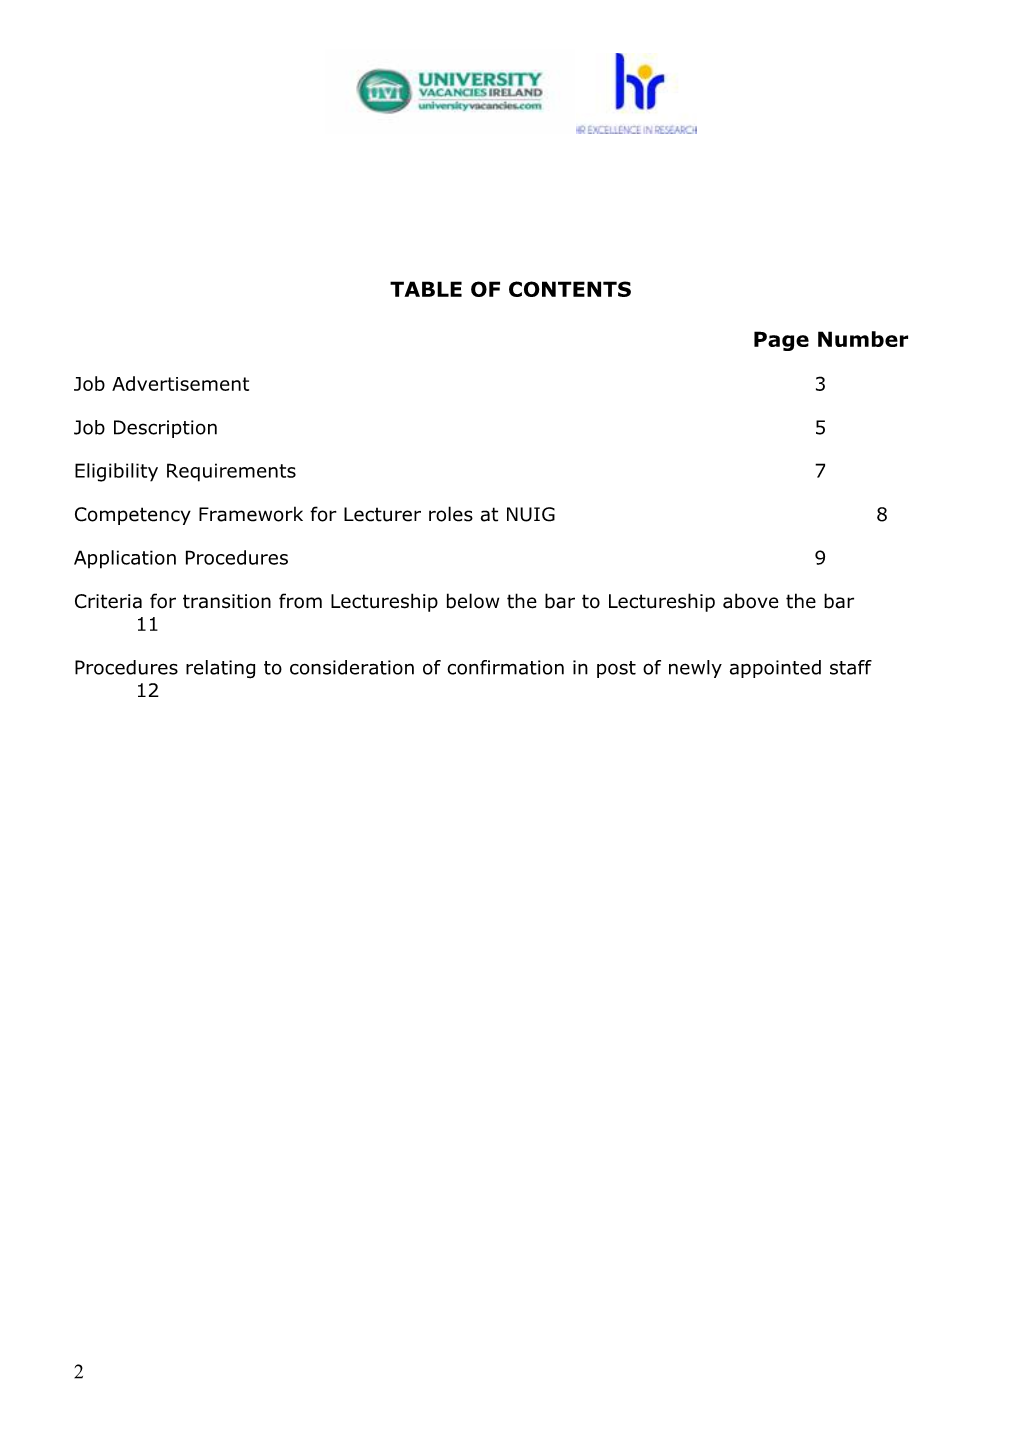 Table of Contents s353